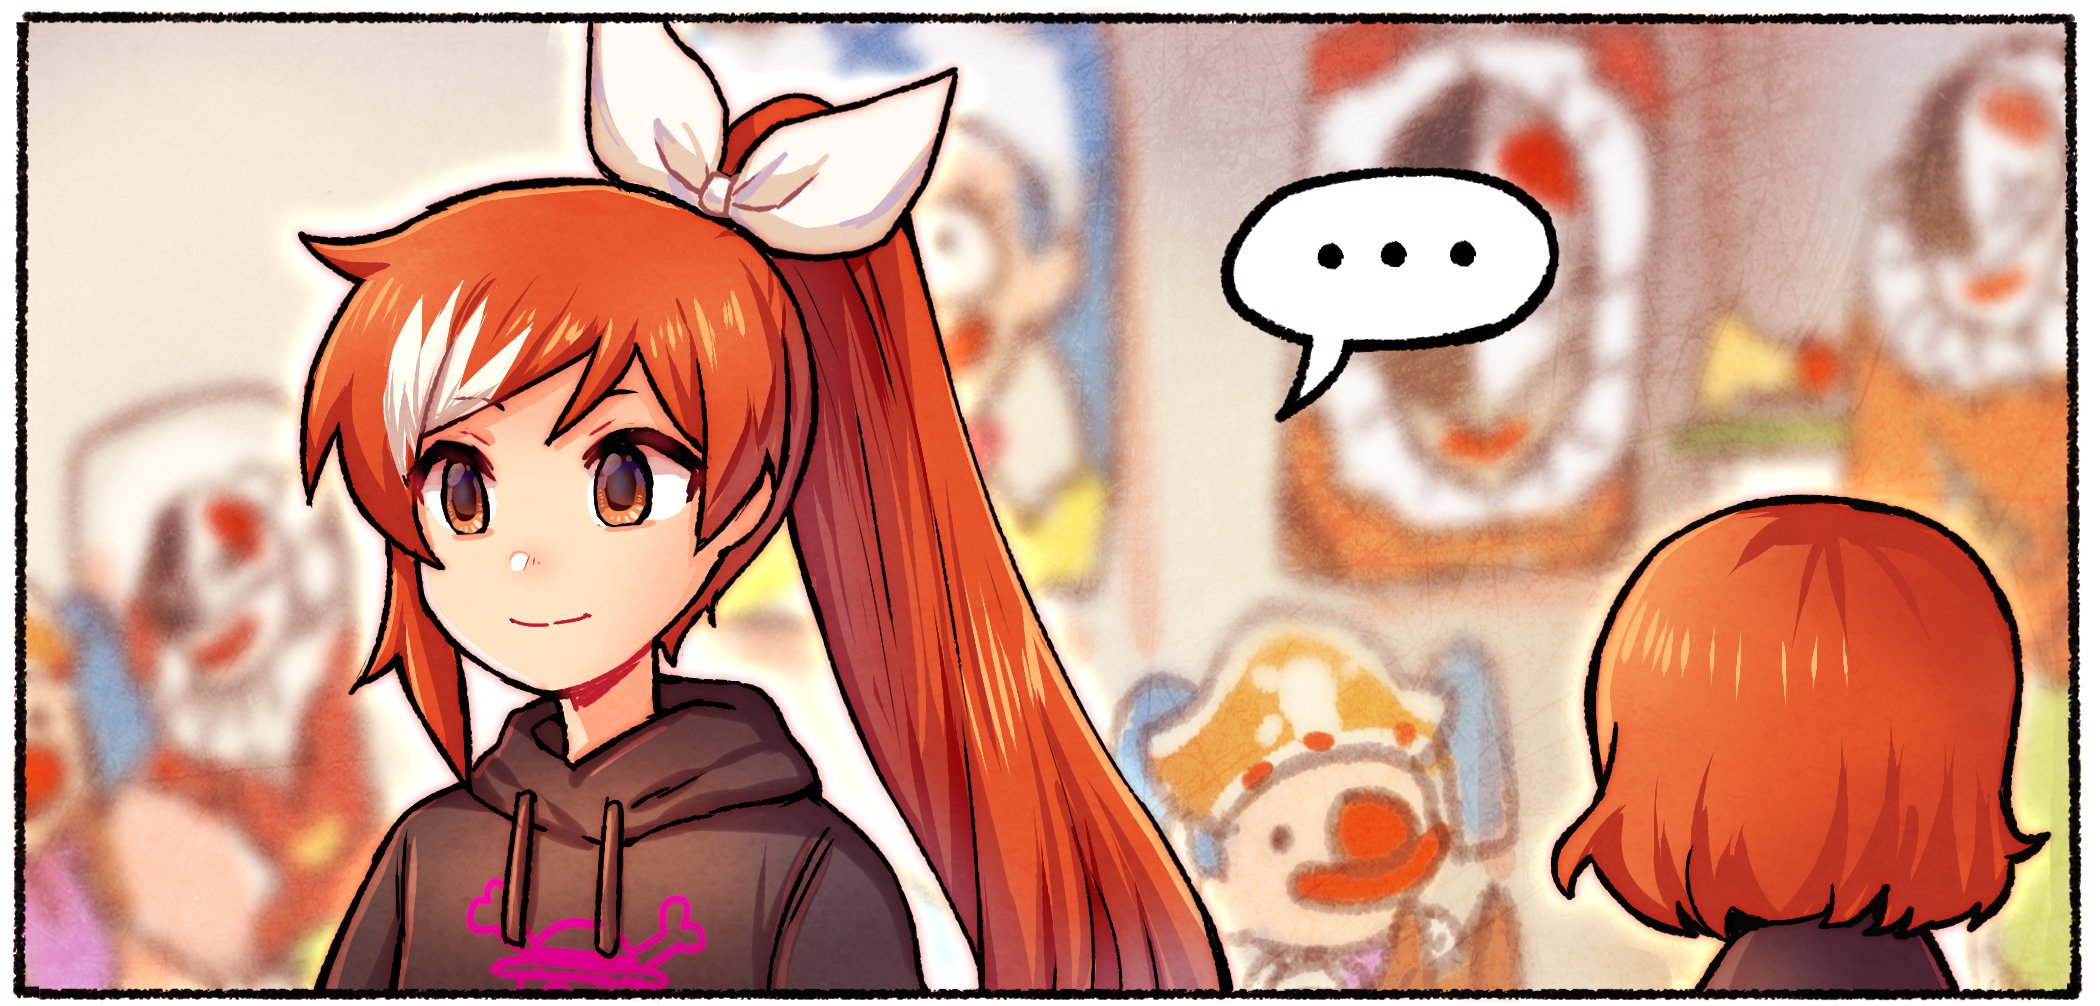 In this week's “The Daily Life of Crunchyroll-Hime” (by coughdrops